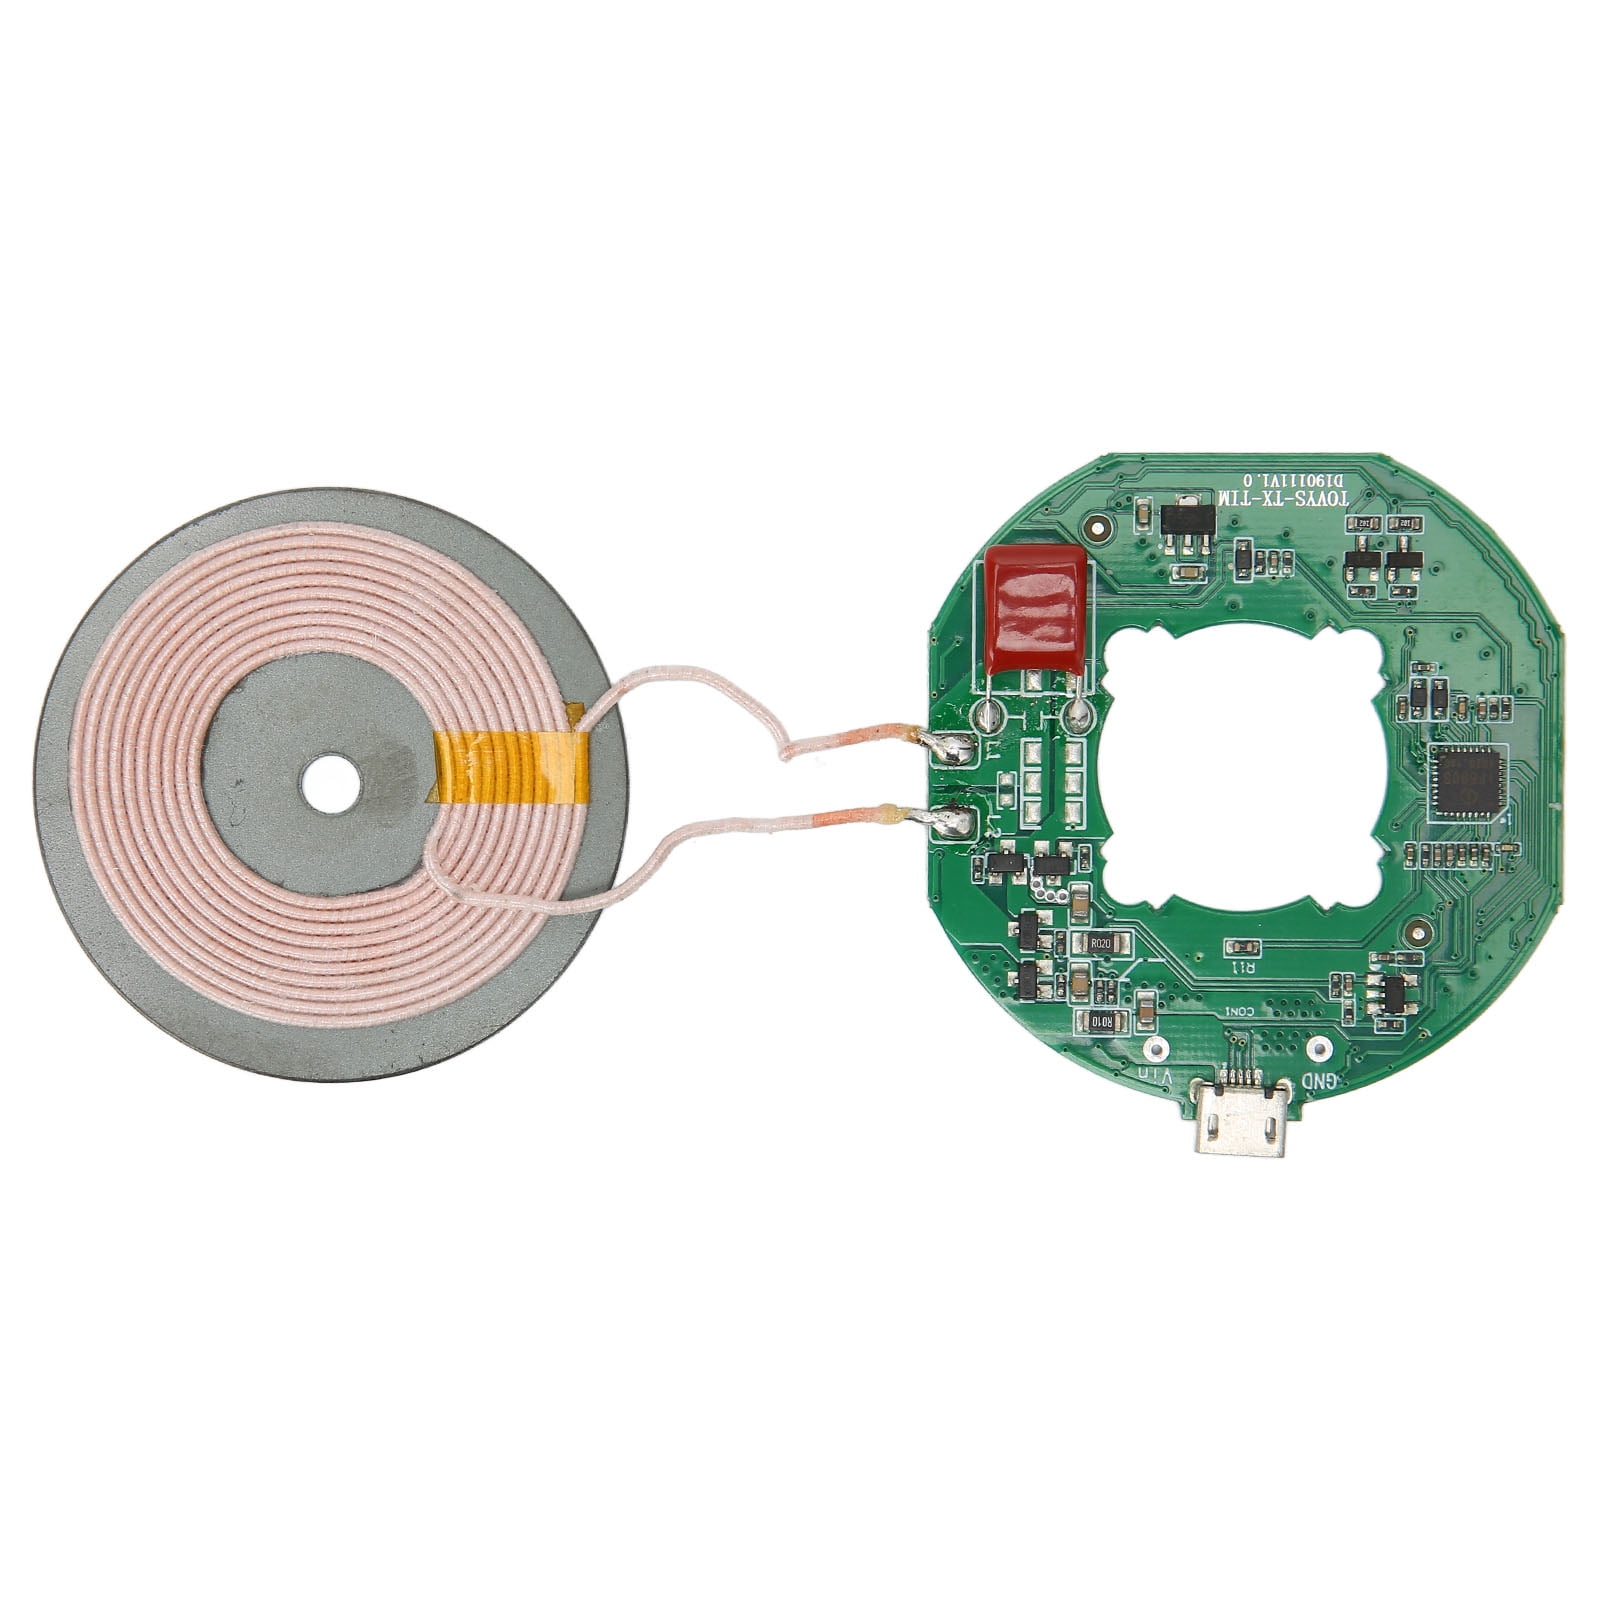 Wireless Charging Coil, Plug And Play Time Saving Wireless Charger PCBA  Circuit Board For DIY Wireless Charging Tool | Walmart Canada